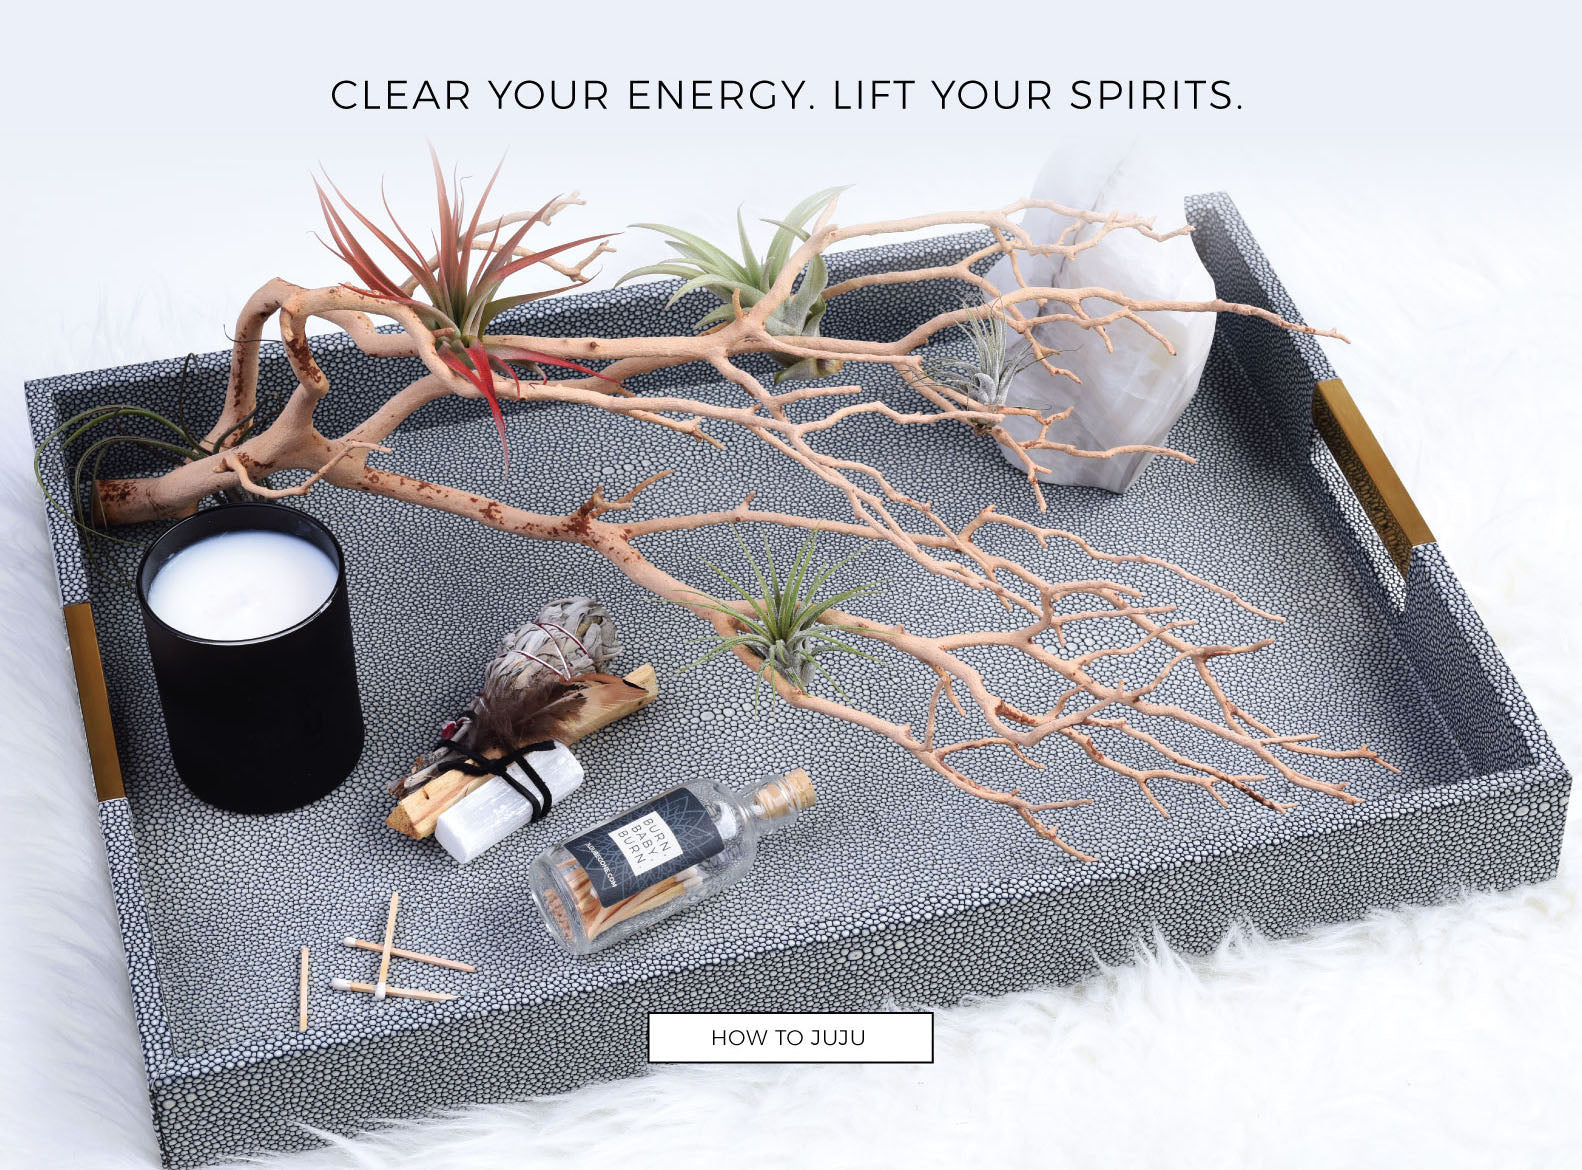 CLEAR YOUR ENERGY. LIFT YOUR SPIRITS.